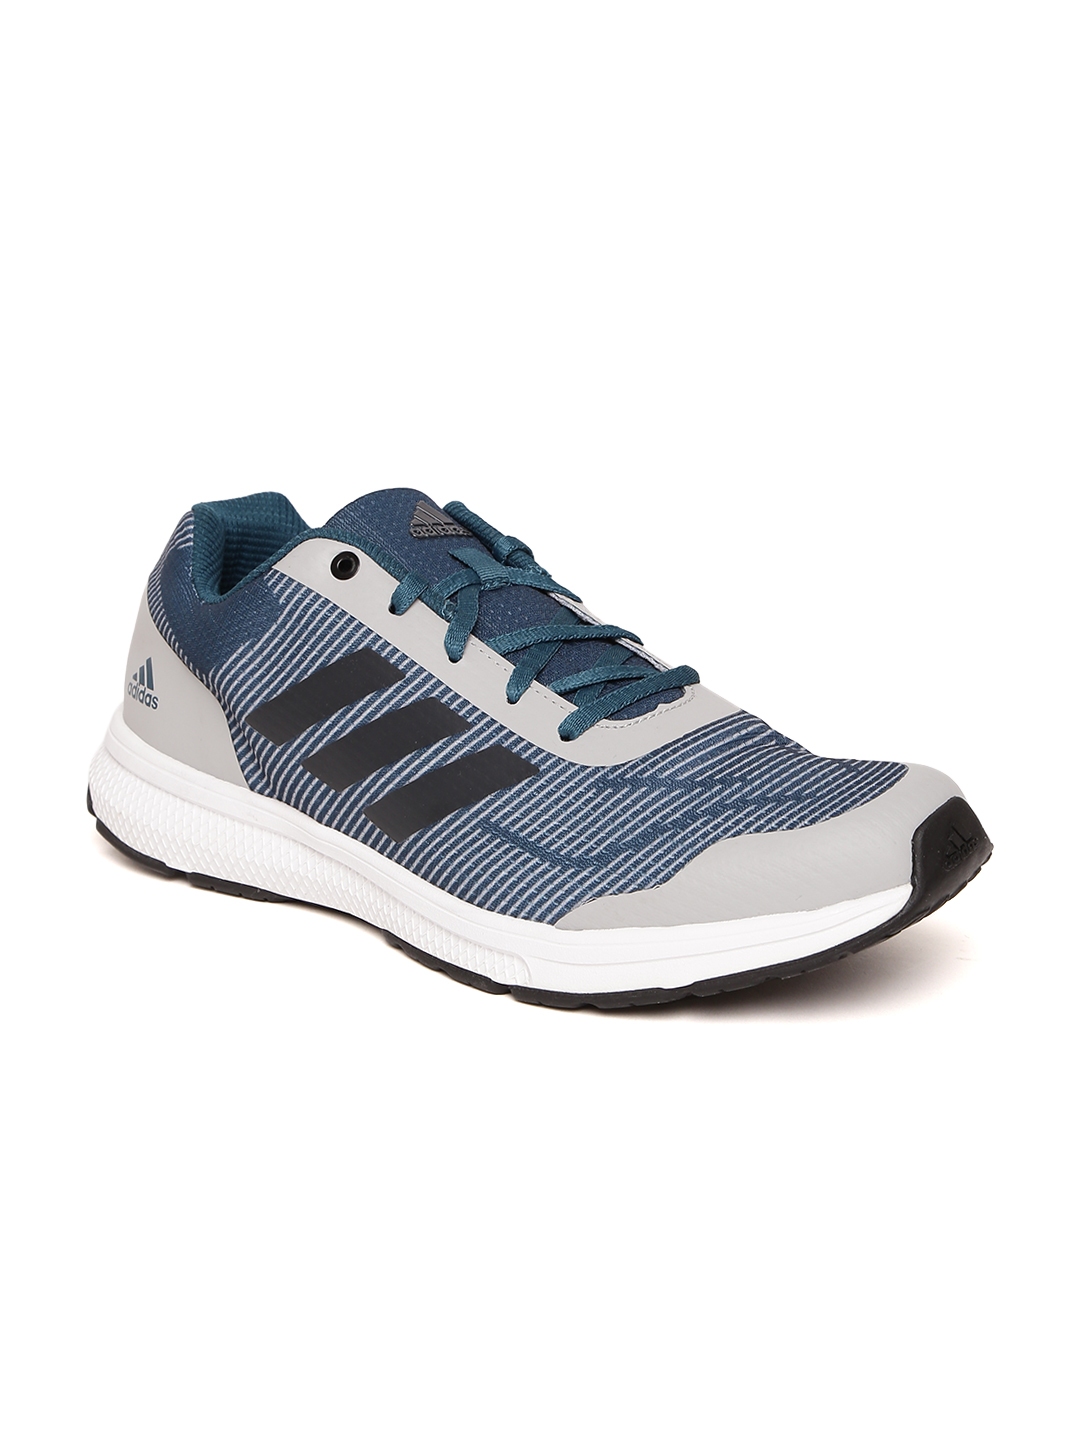 Buy ADIDAS Men Teal Blue & Grey RADDIS Running Shoes - Sports Shoes for ...